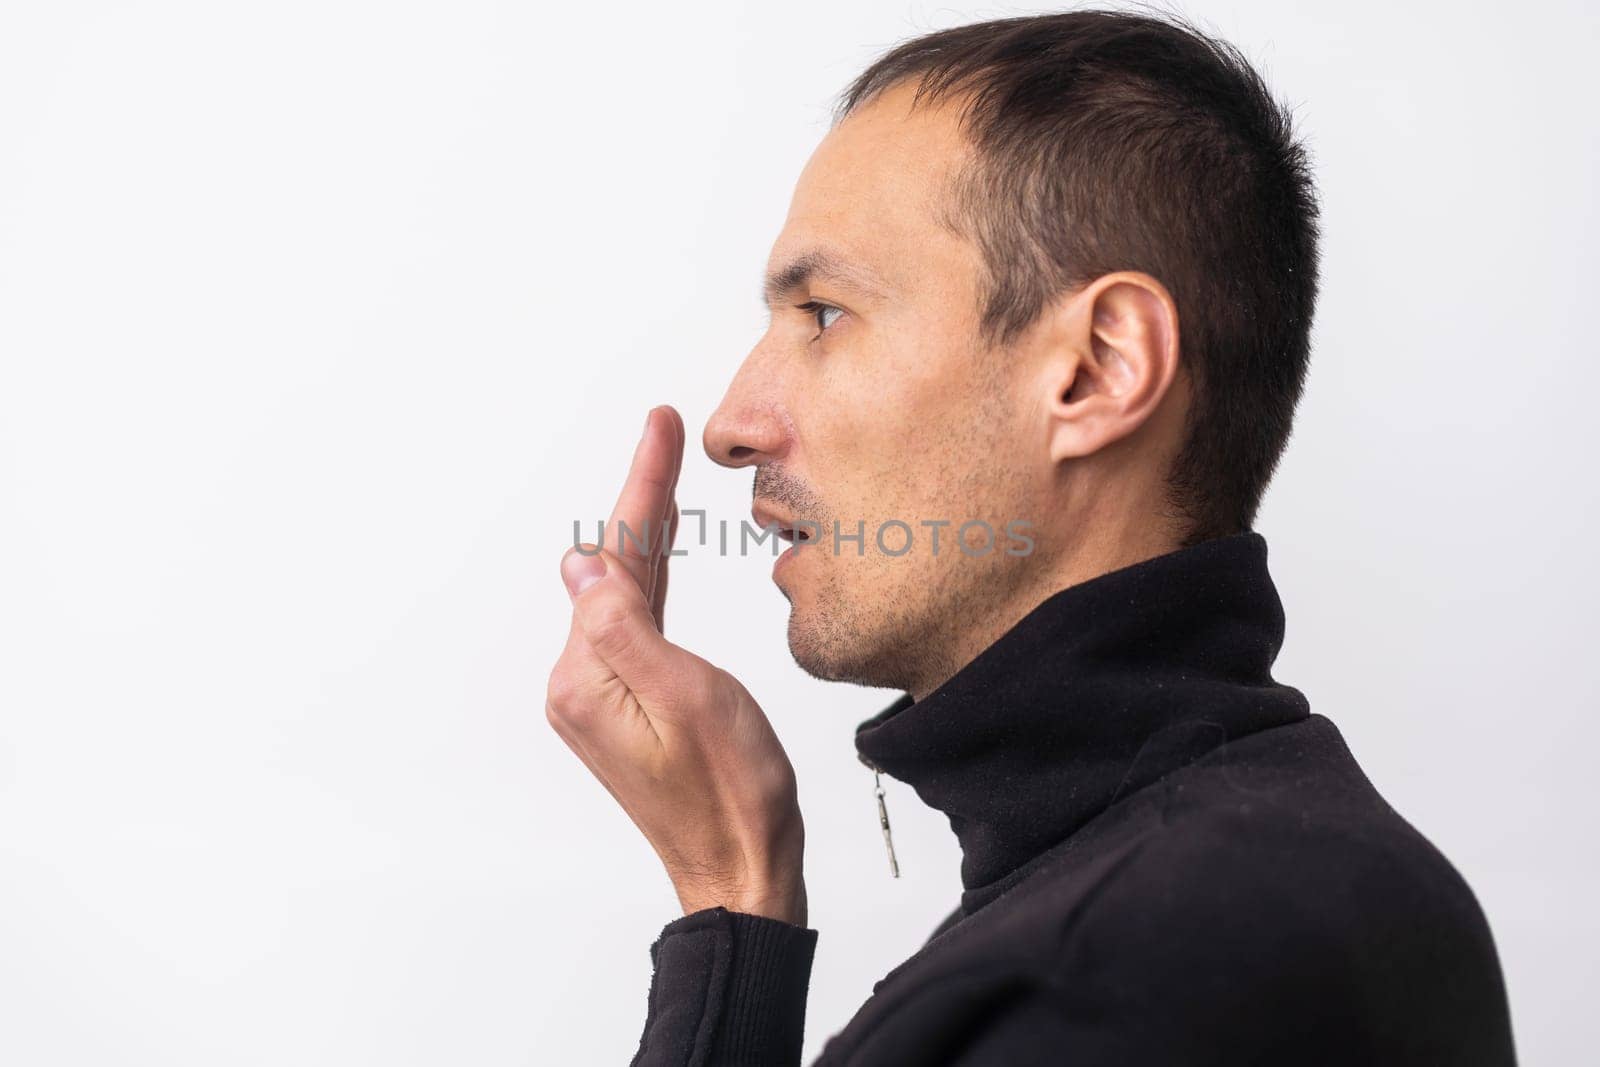 Bad breath. The concept of halitosis. A young man checks his breath with his hand.